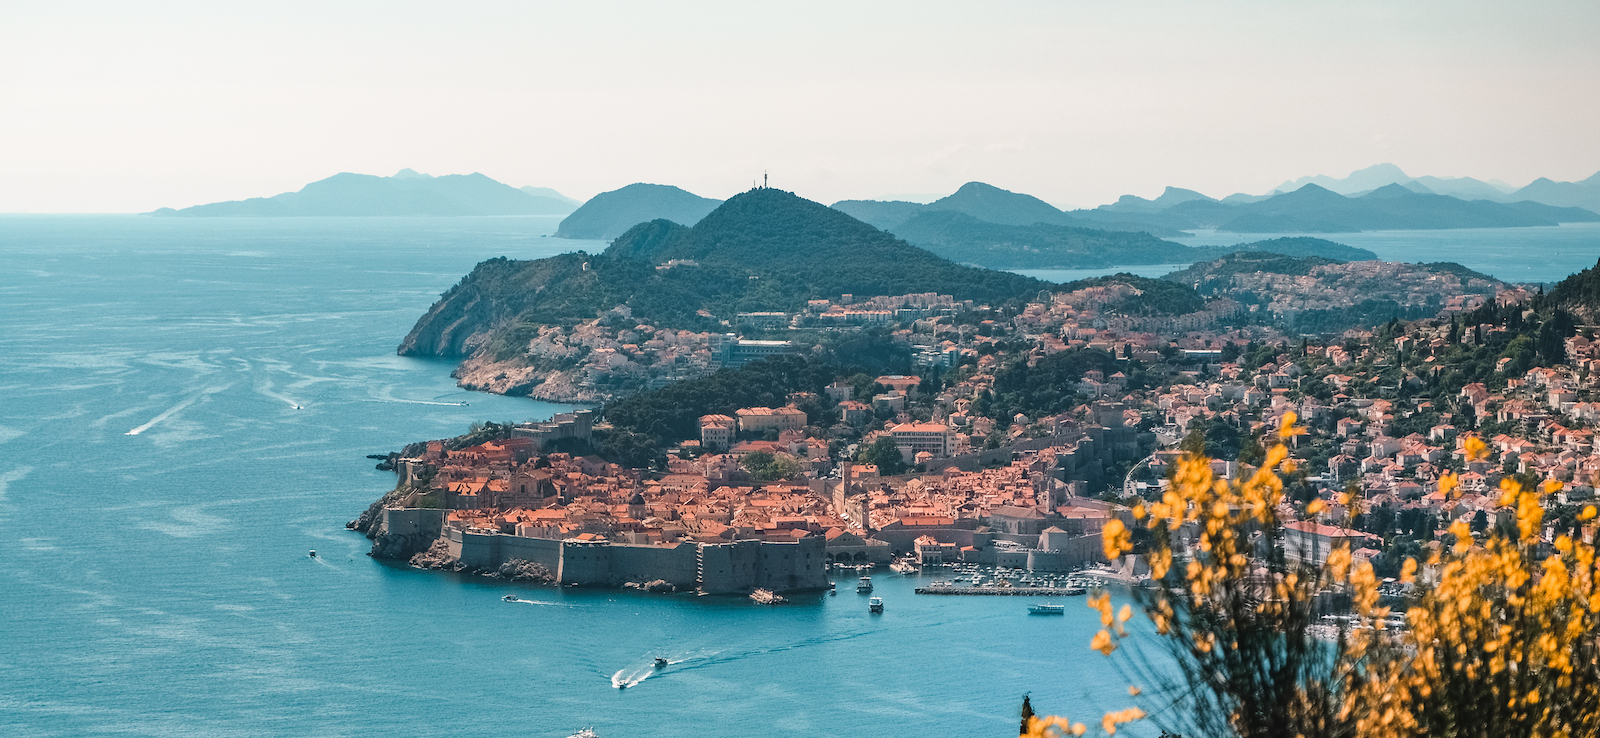 The beauty of Dubrovnik.